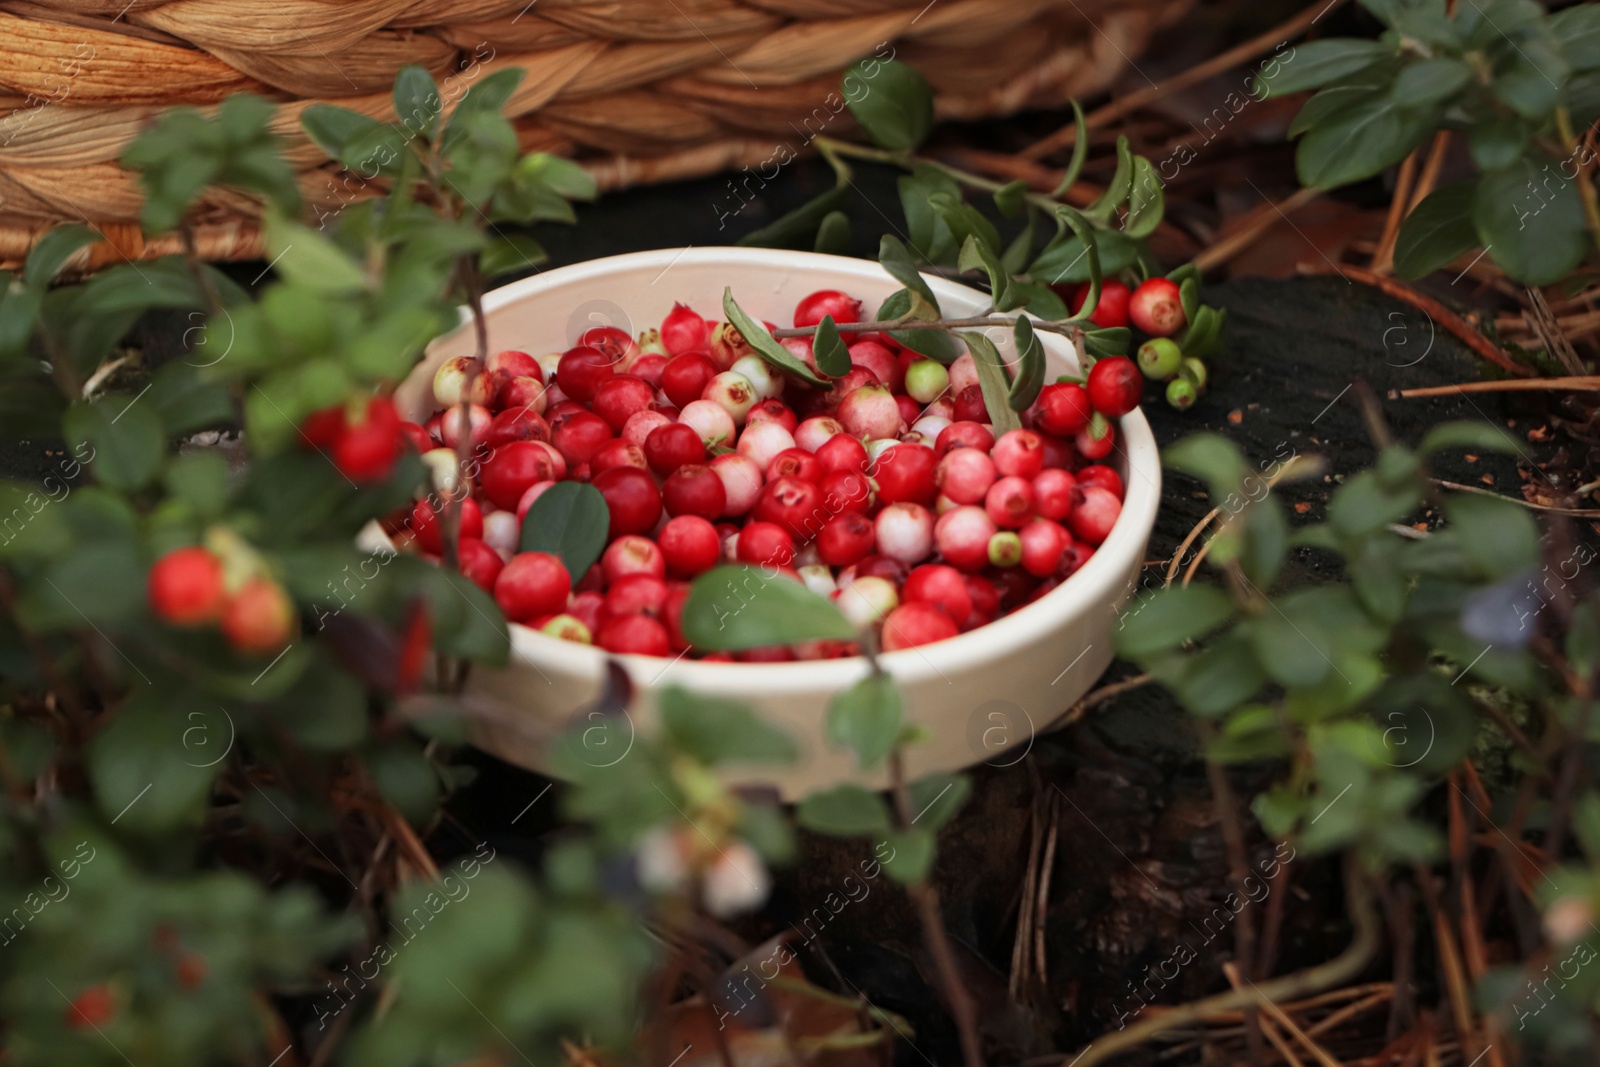 Photo of Bowl of delicious ripe red lingonberries outdoors